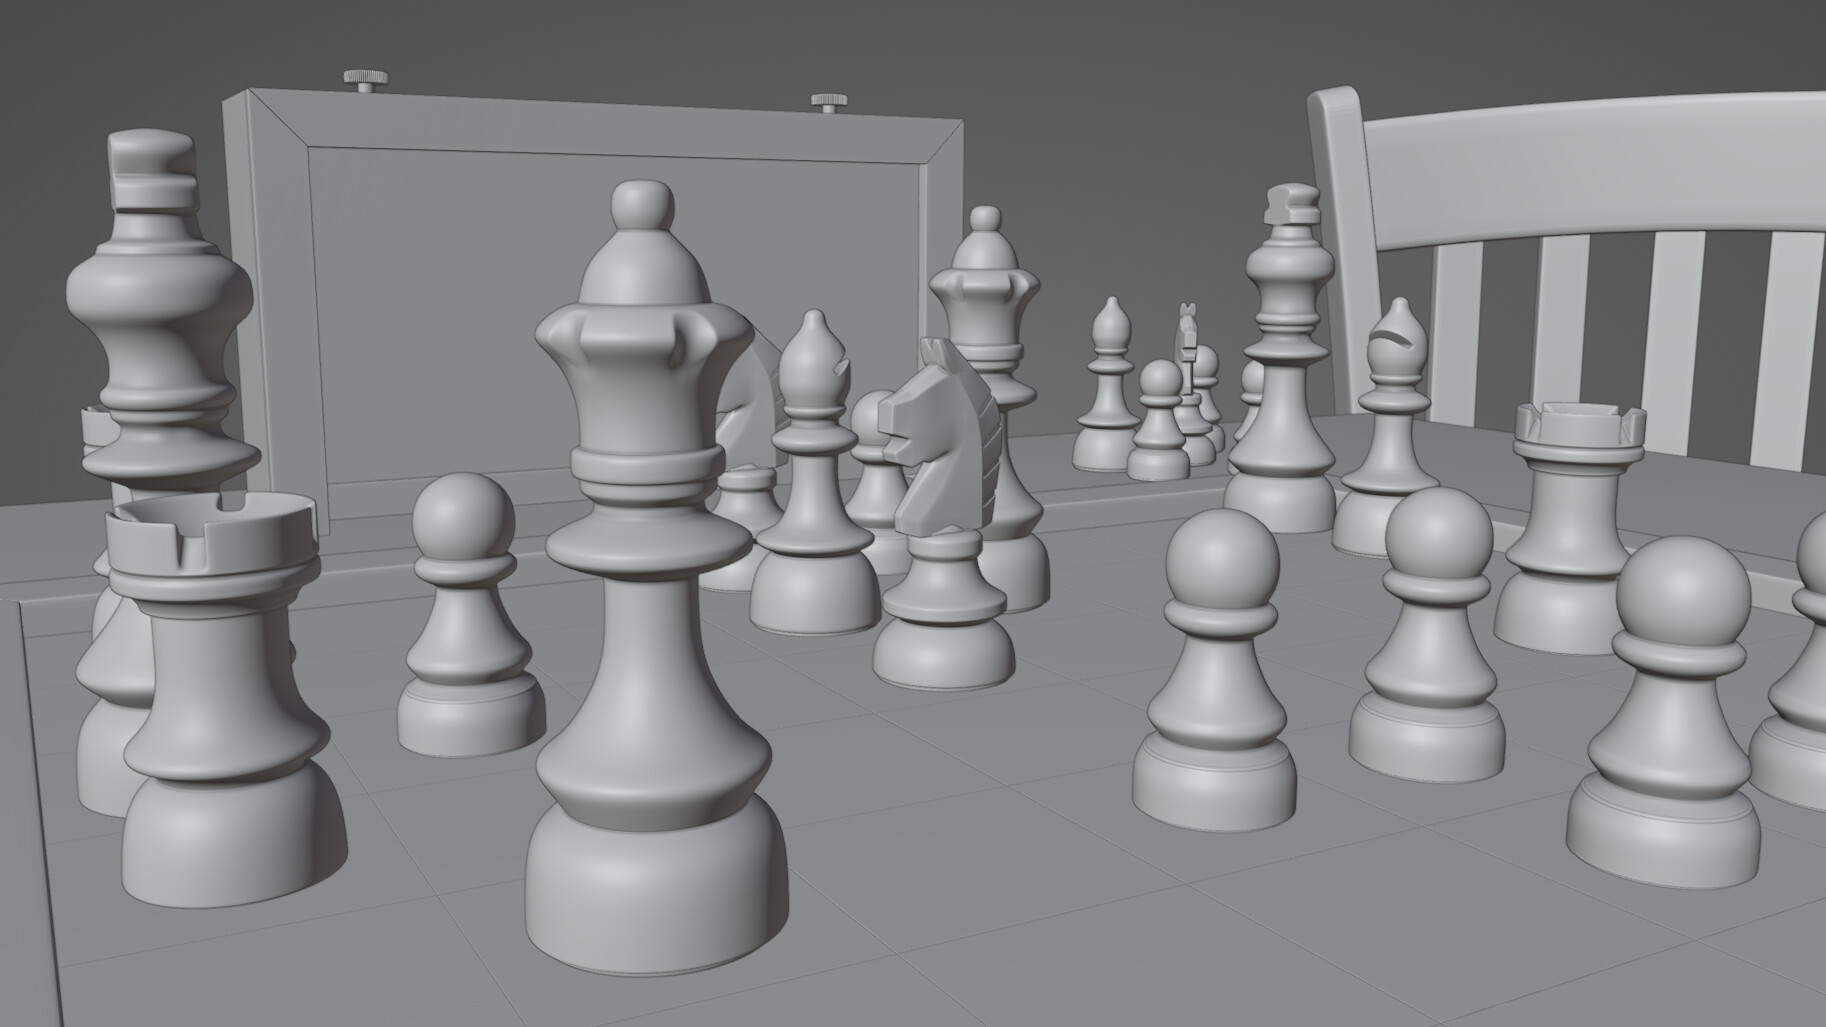 Reference Chess 